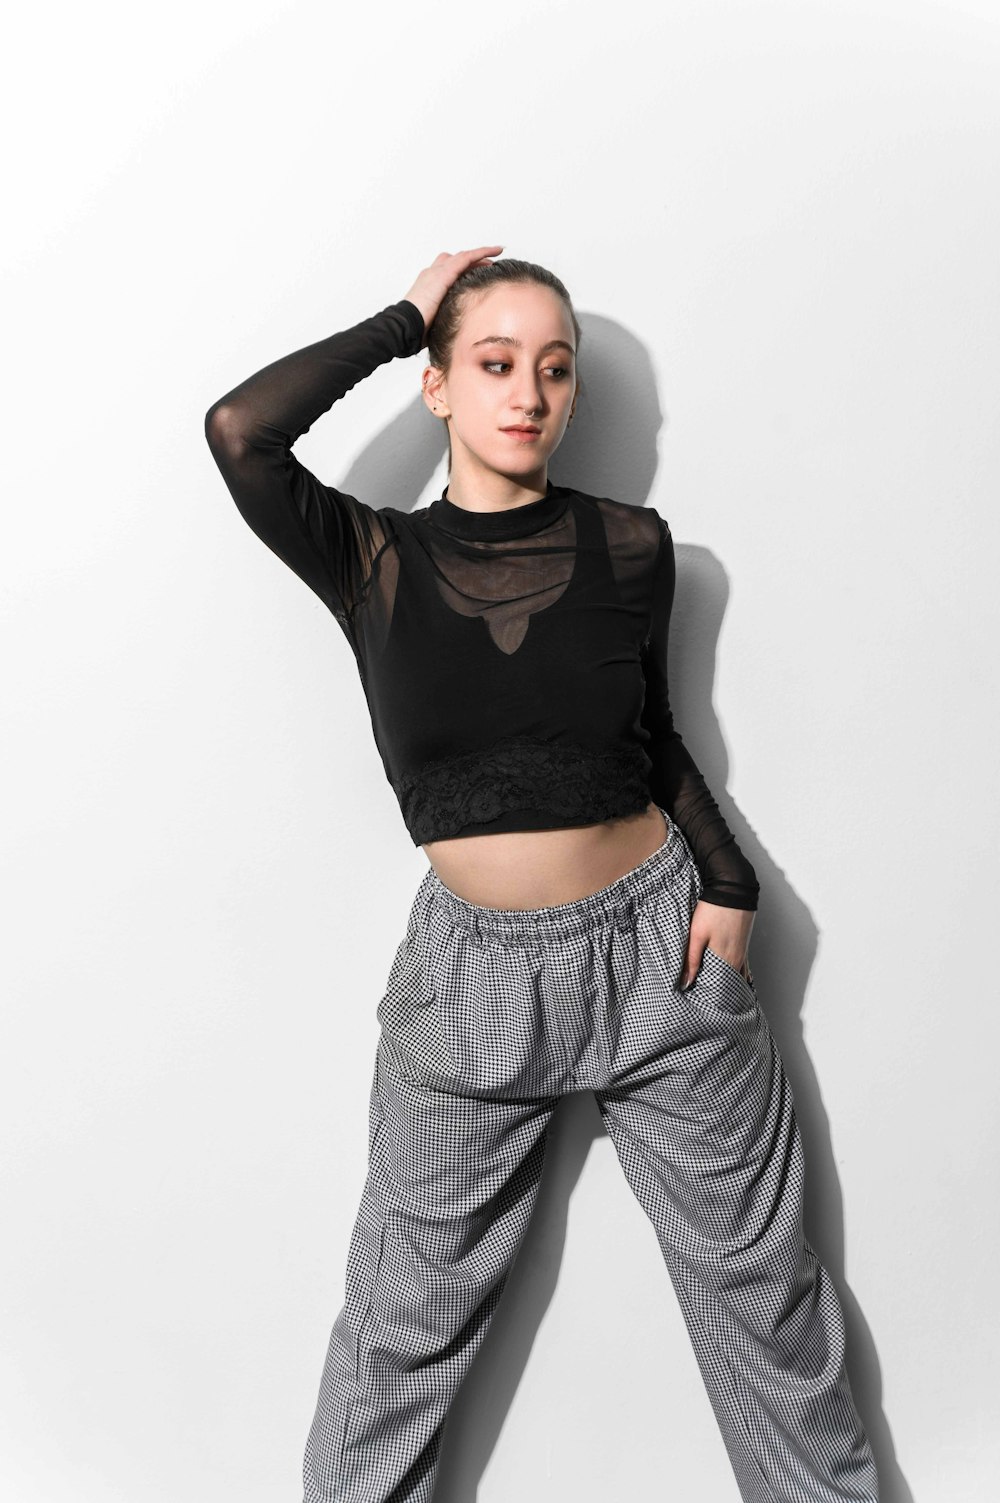 a woman posing in a black top and grey pants